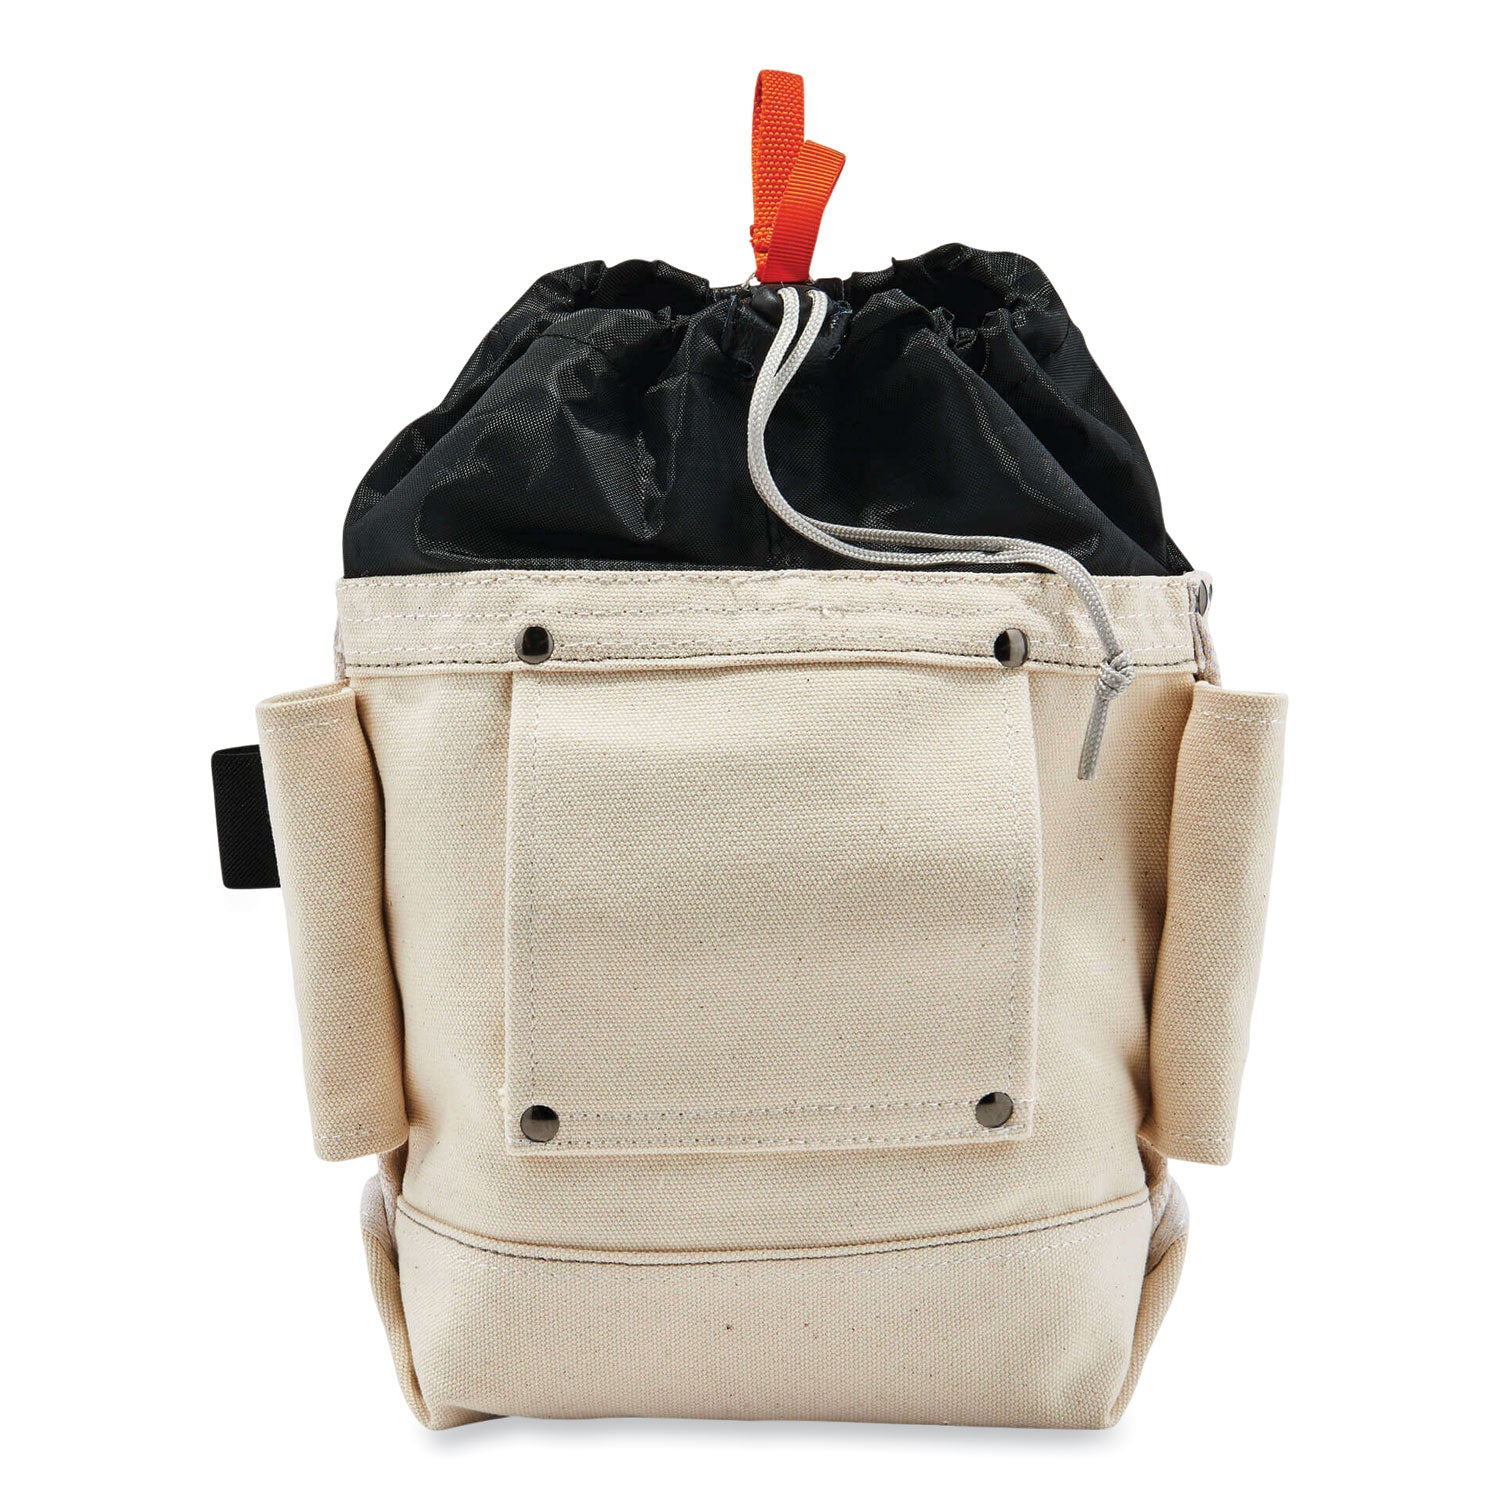 arsenal-5725-topped-bolt-bag-5-x-10-x-9-canvas-white-ships-in-1-3-business-days_ego14425 - 3